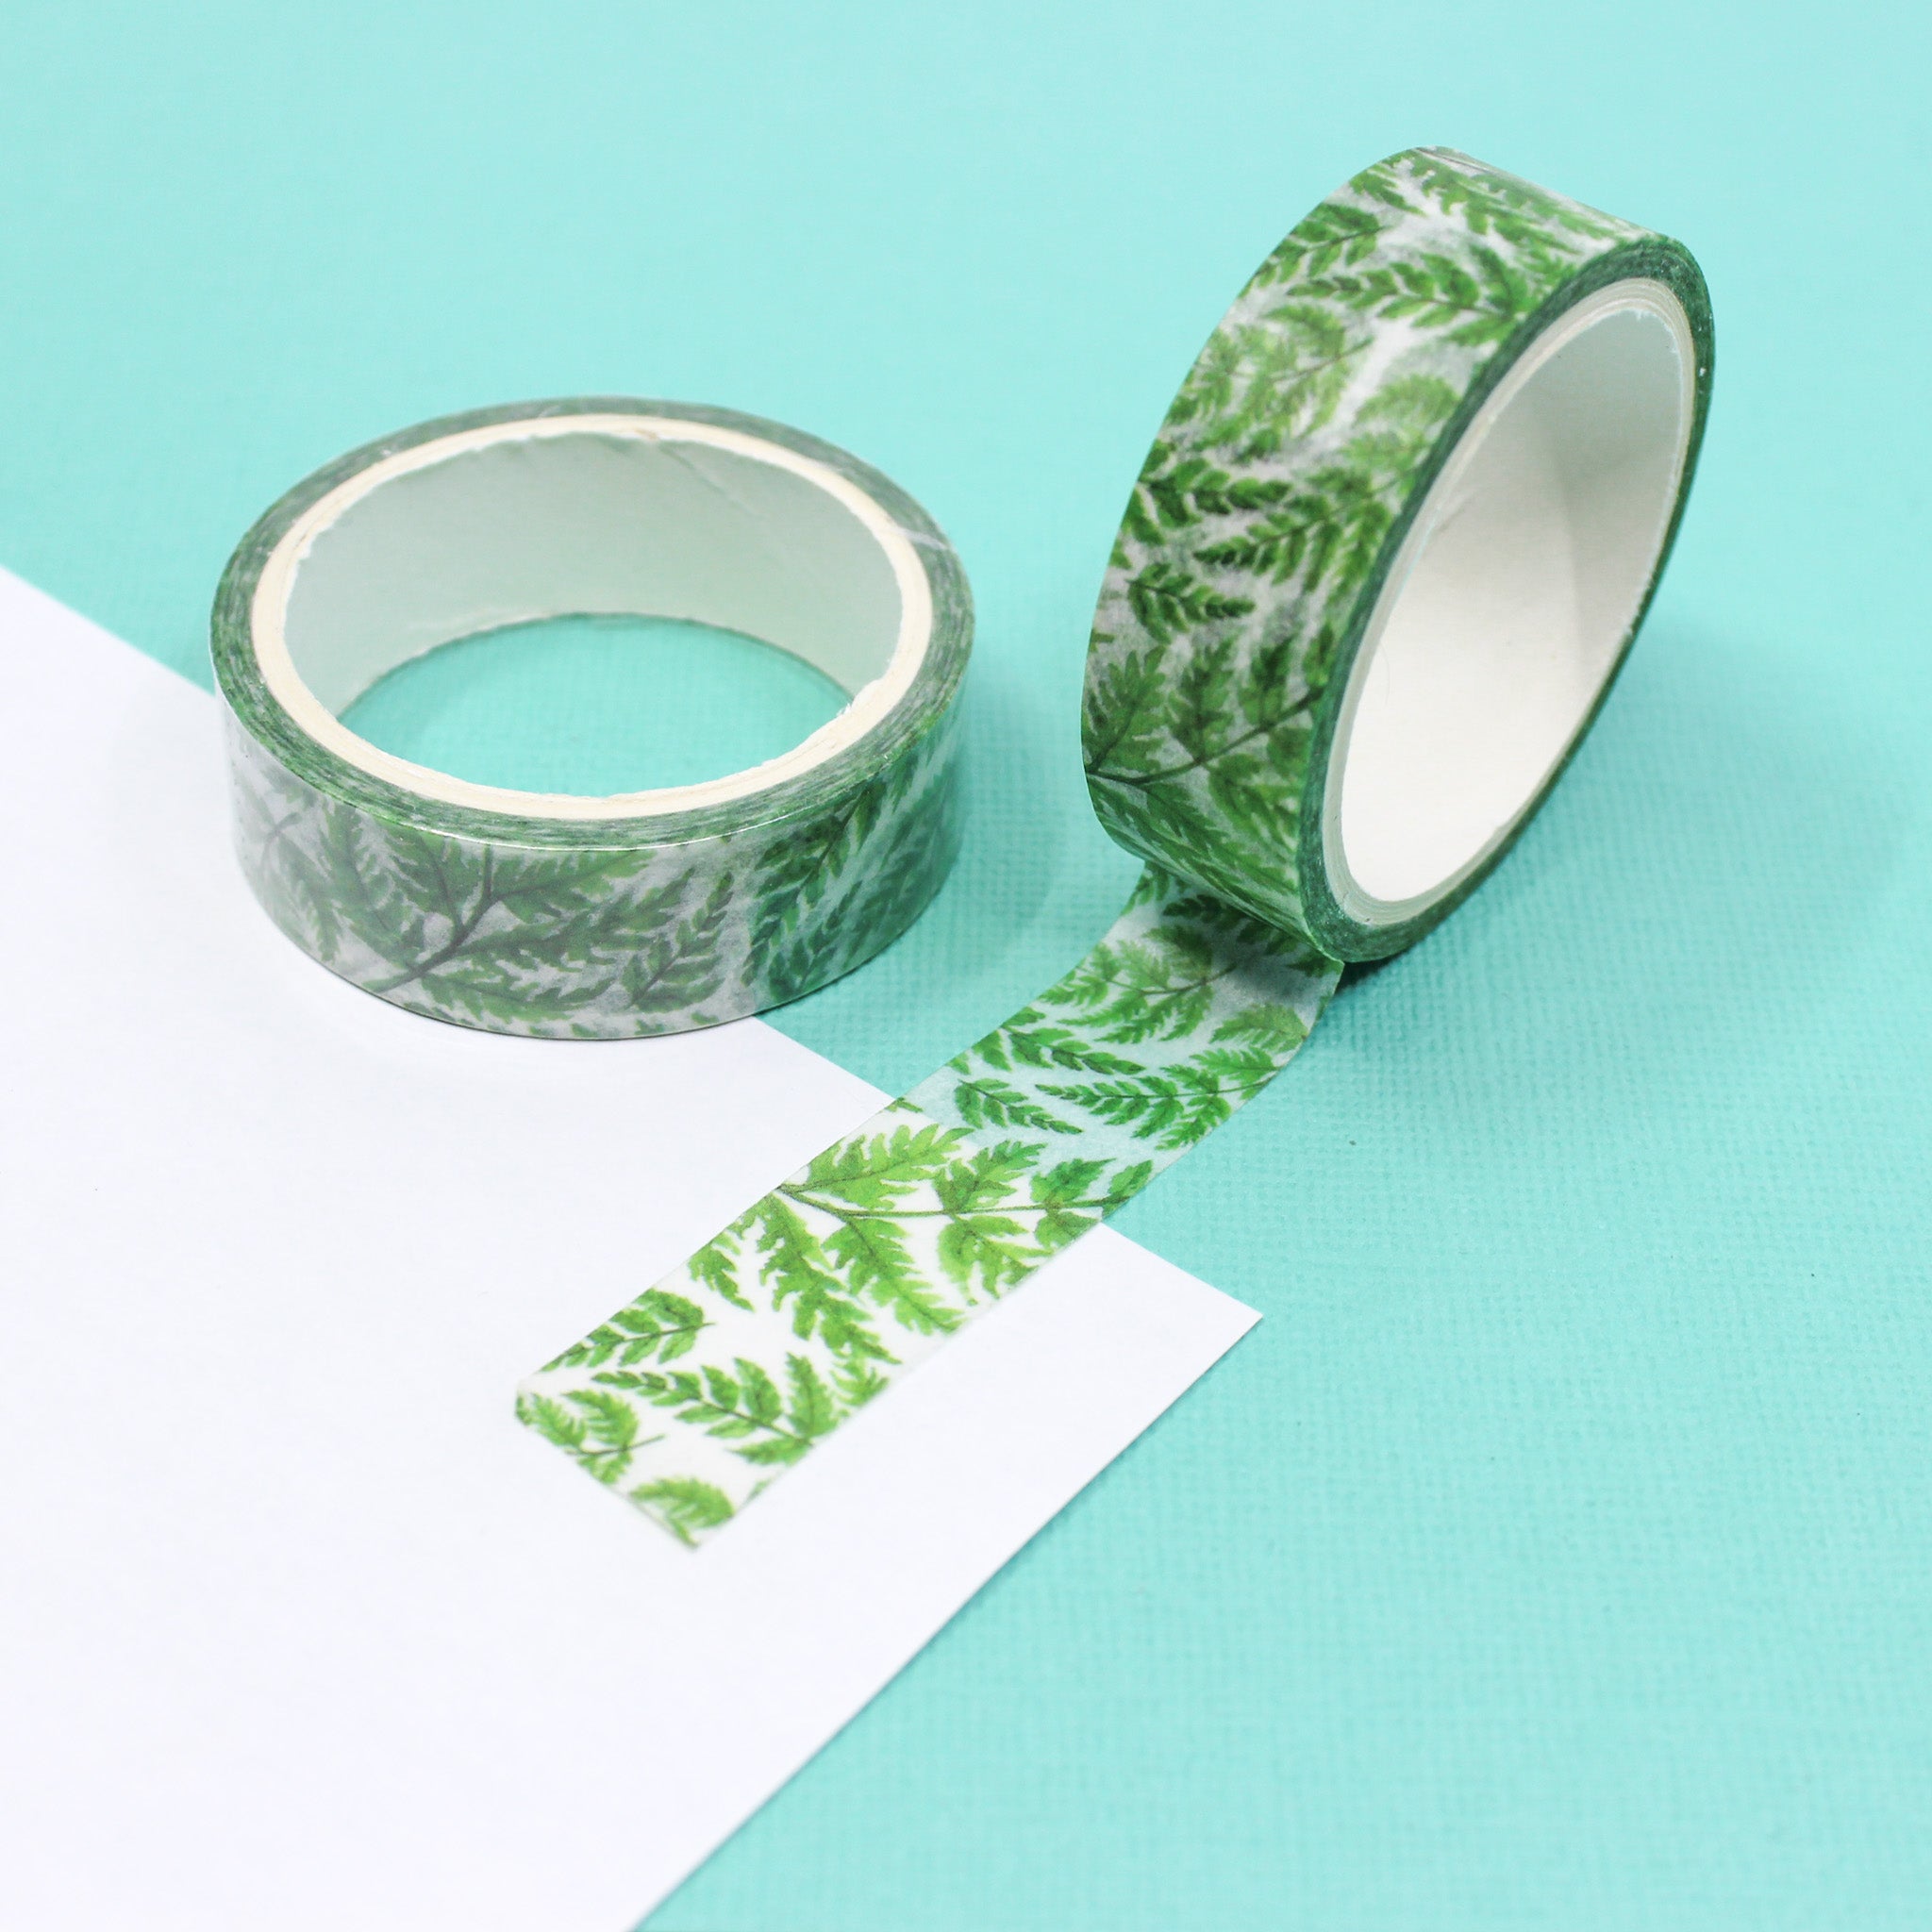 This a green fern leaves pattern washi tape from BBB Supplies Craft Shop